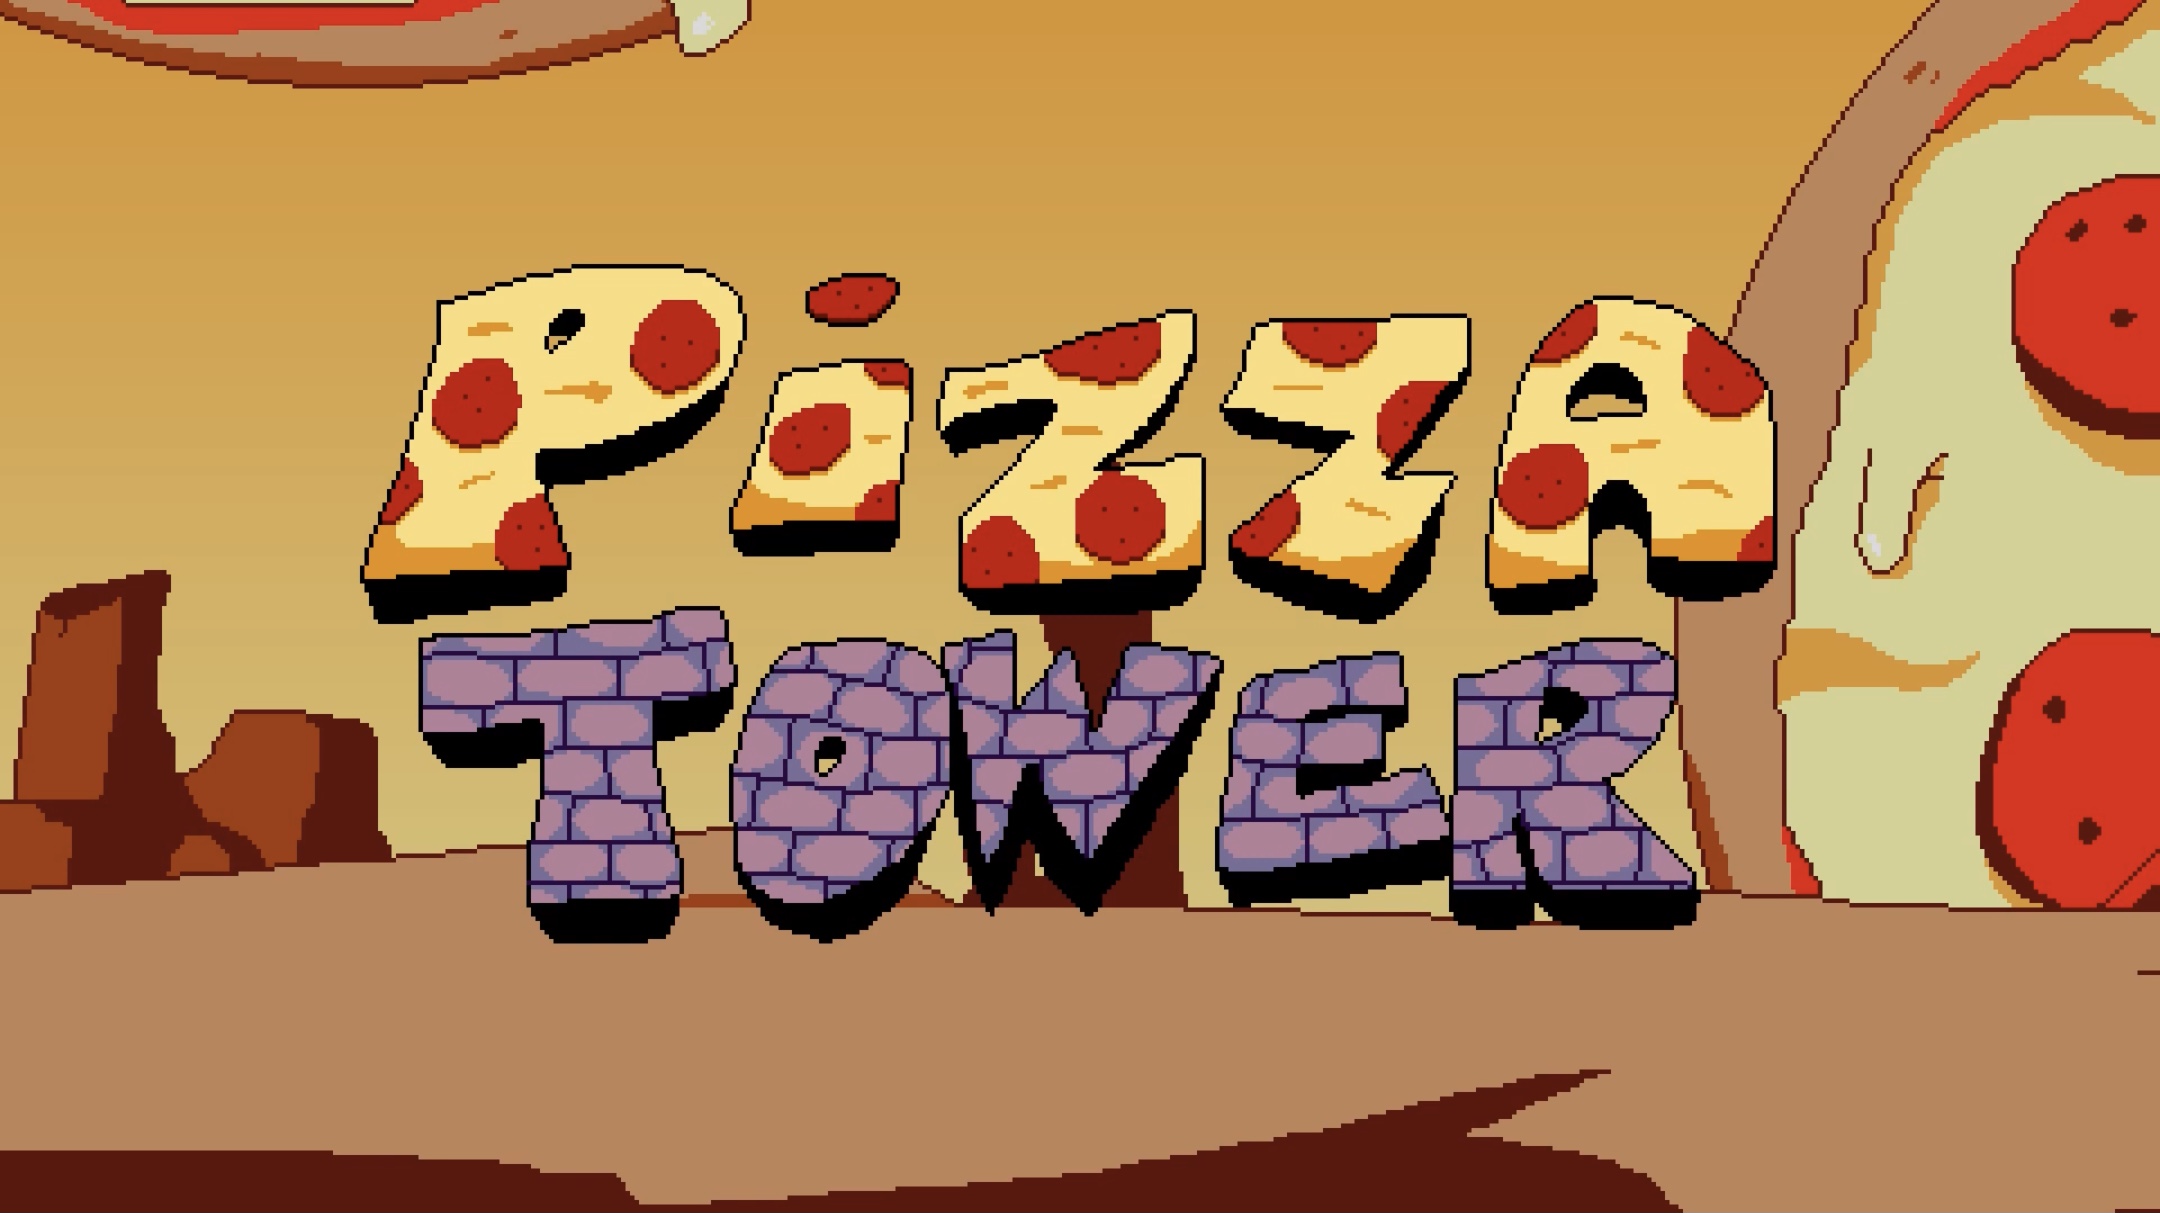 Pizza Tower Unmodified from Source Builds : Tour de Pizza : Free  Download, Borrow, and Streaming : Internet Archive